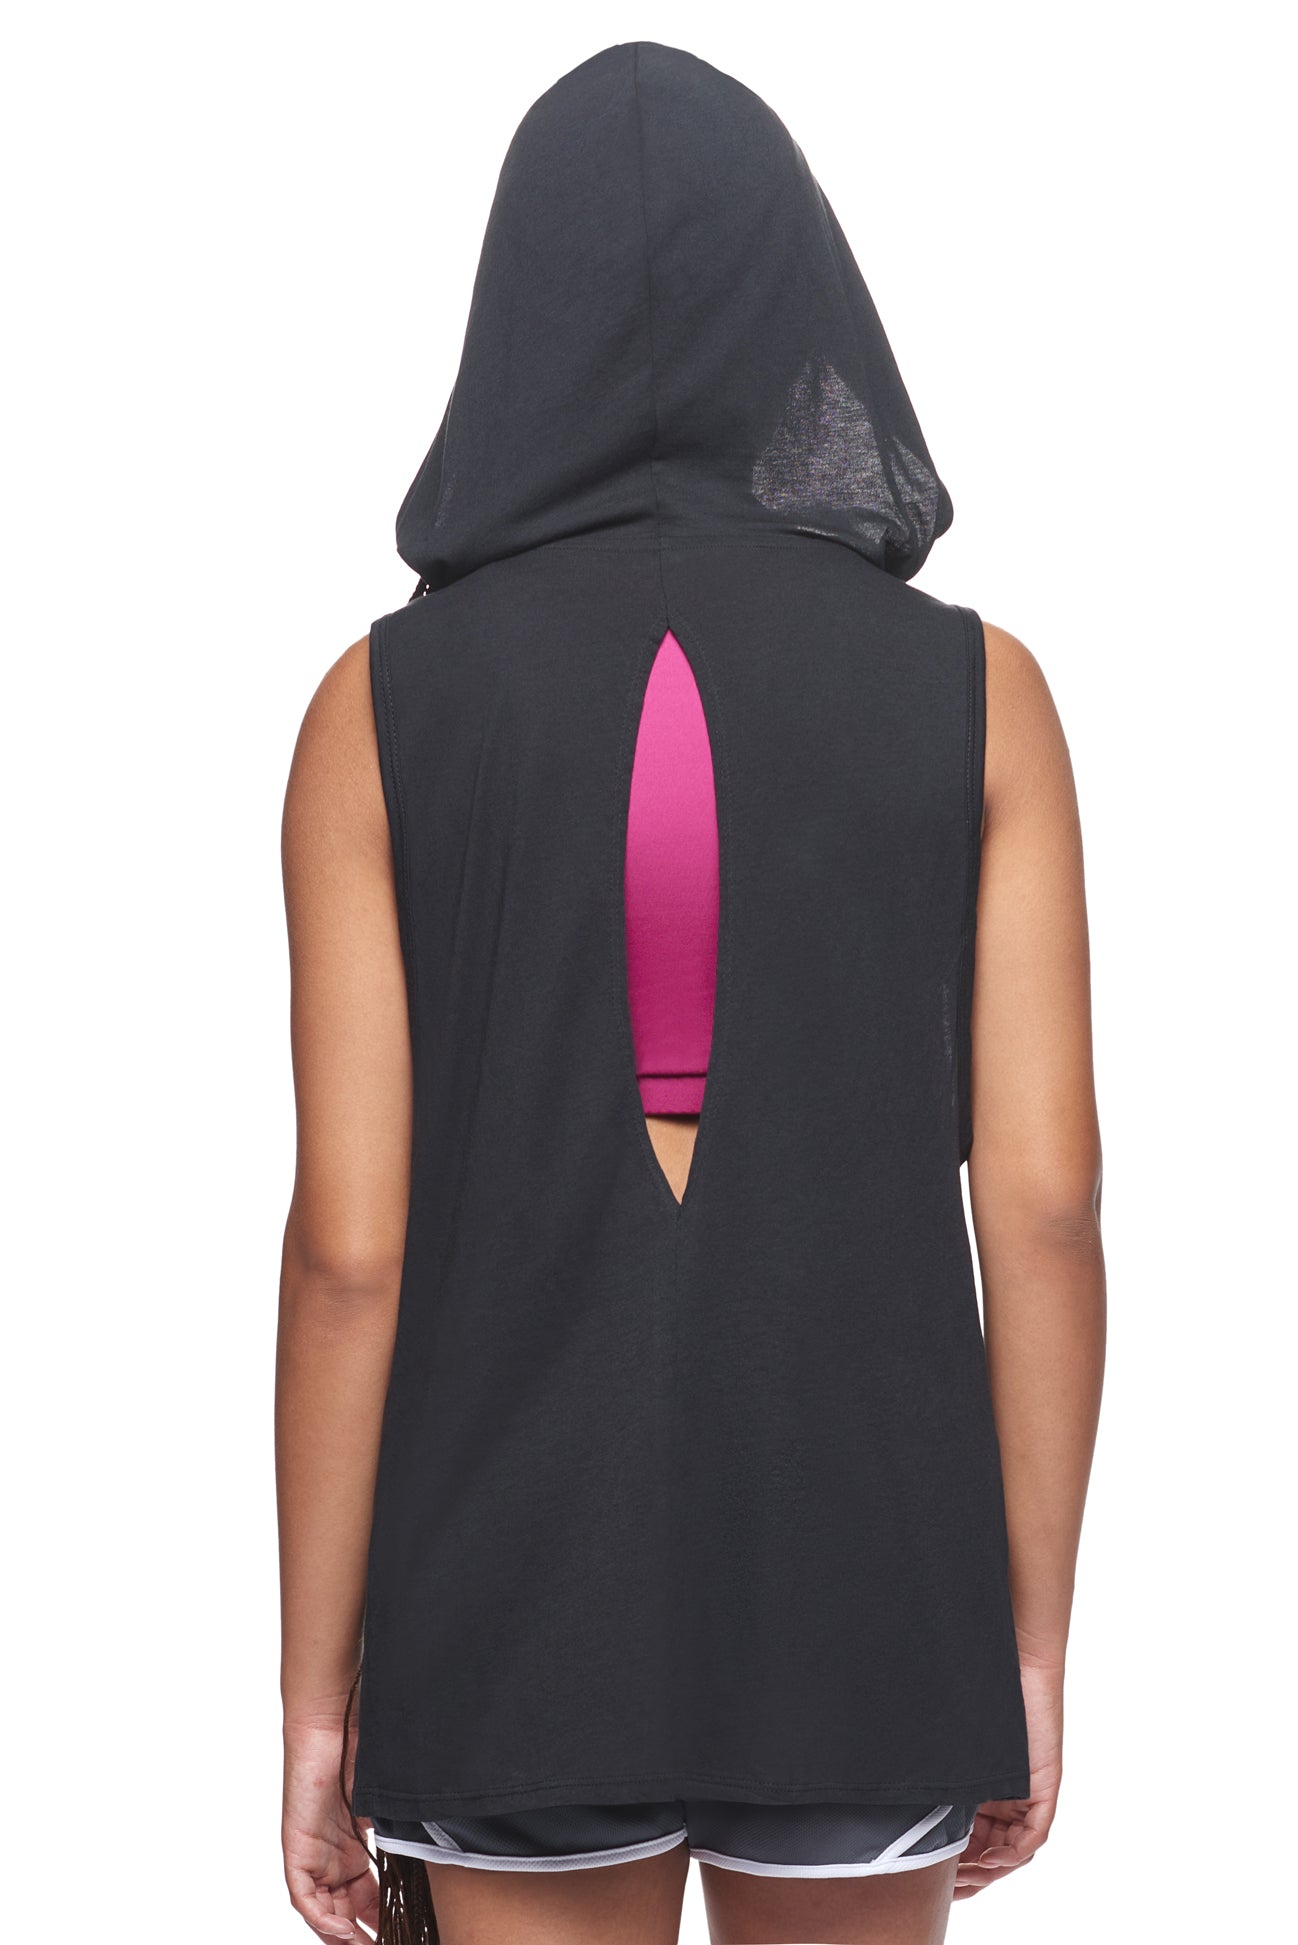 Expert Brand Wholesale Sustainable Eco-Friendly Apparel Micromodal Organic Cotton Moca Women's Sleeveless Hoodie Made in USA black 2#black